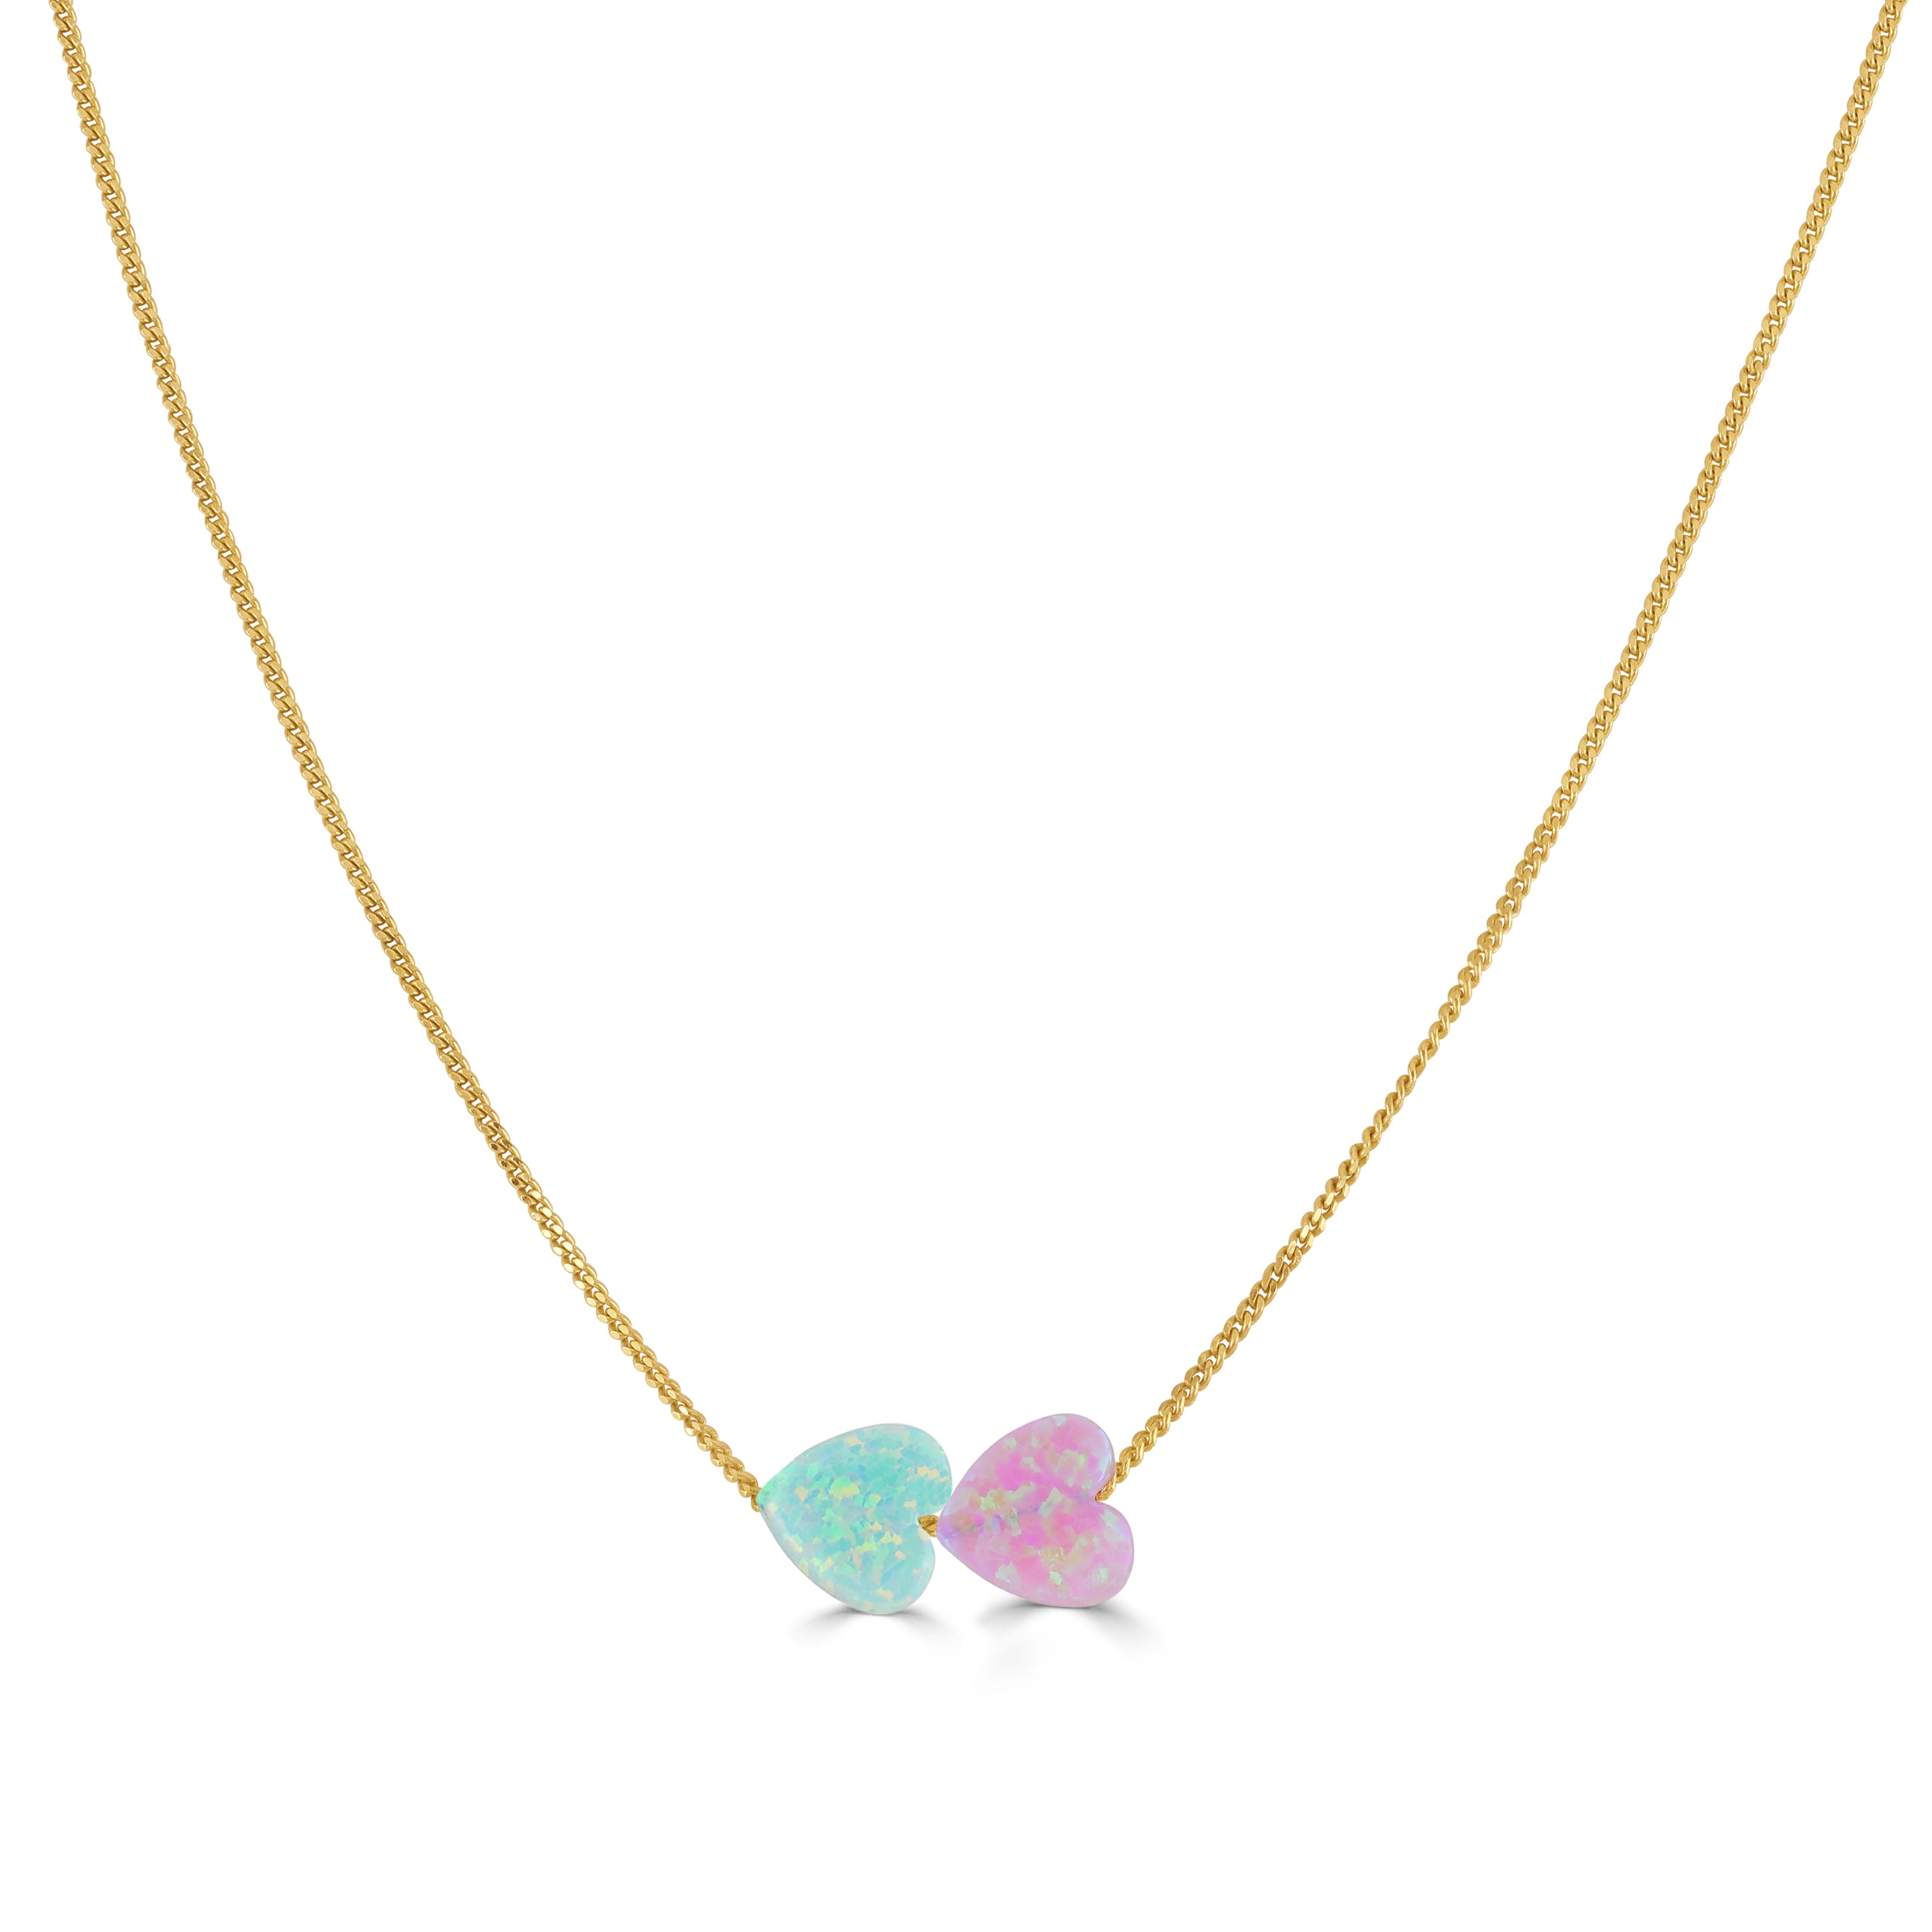 Aqua and Pink Opal Heart Necklace Gold